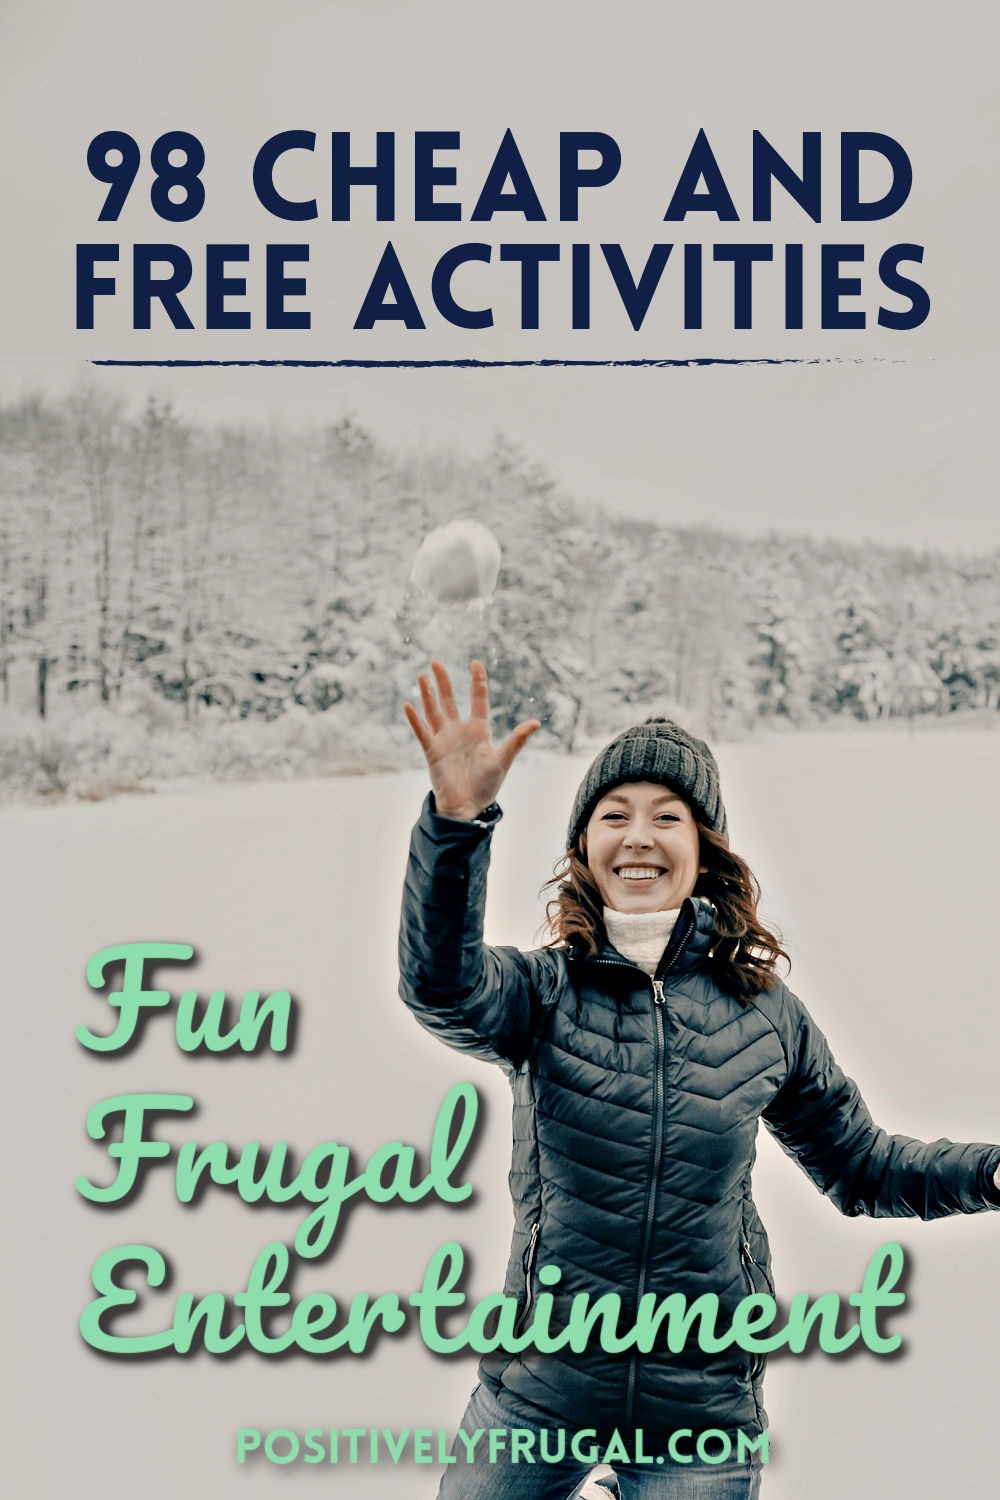 98 Cheap and Free Activities Fun Frugal Entertainment by PositivelyFrugal.com